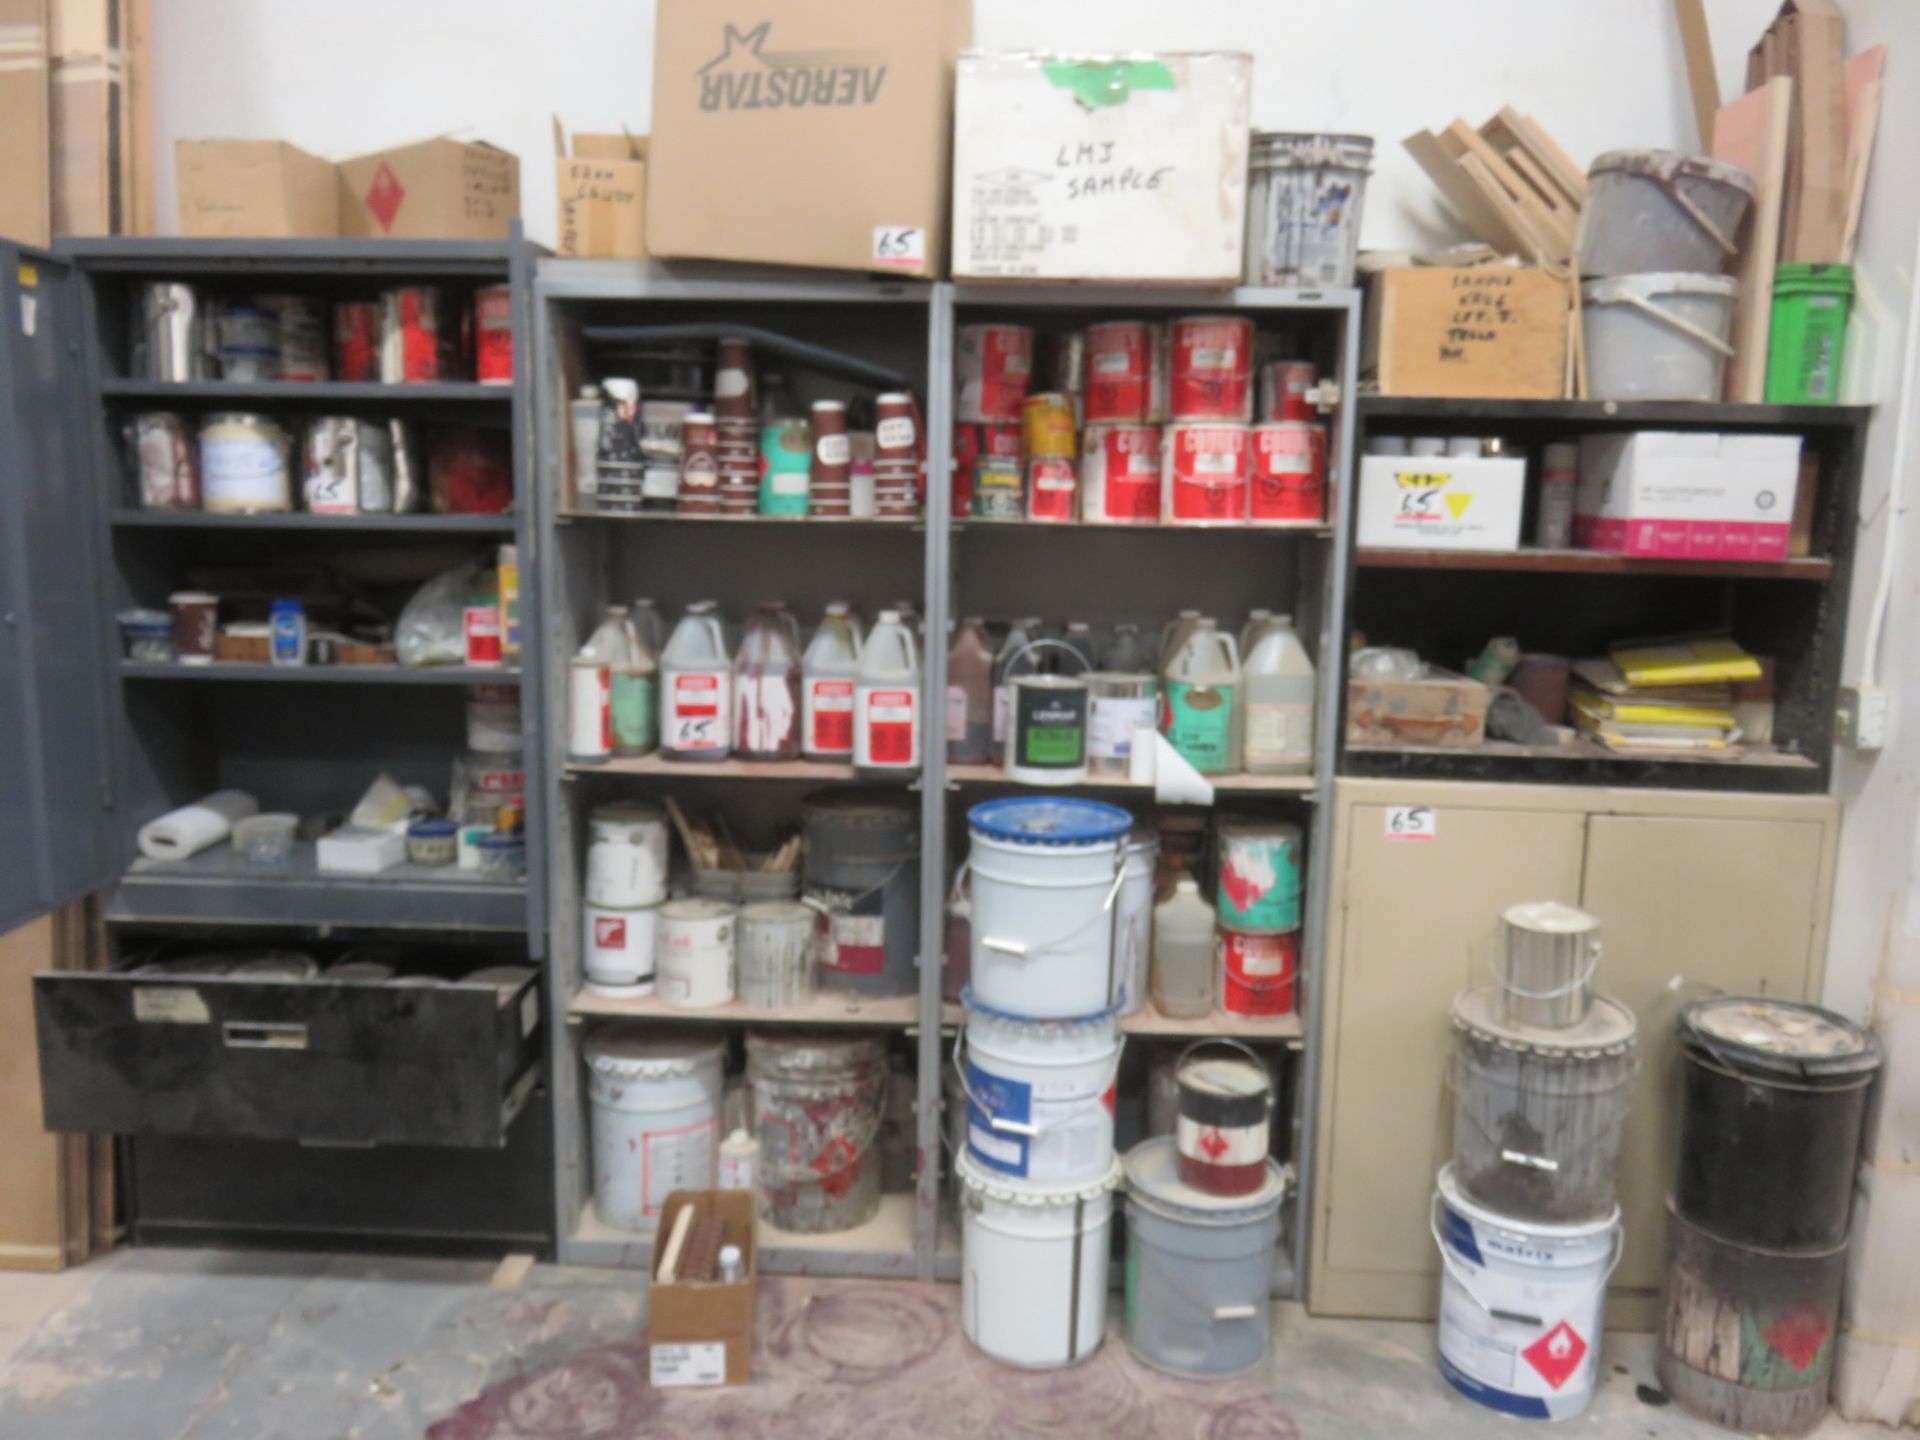 LOT - PAINTS / STAINS / SOLVENT / ADHESIVES W/ CABINETS